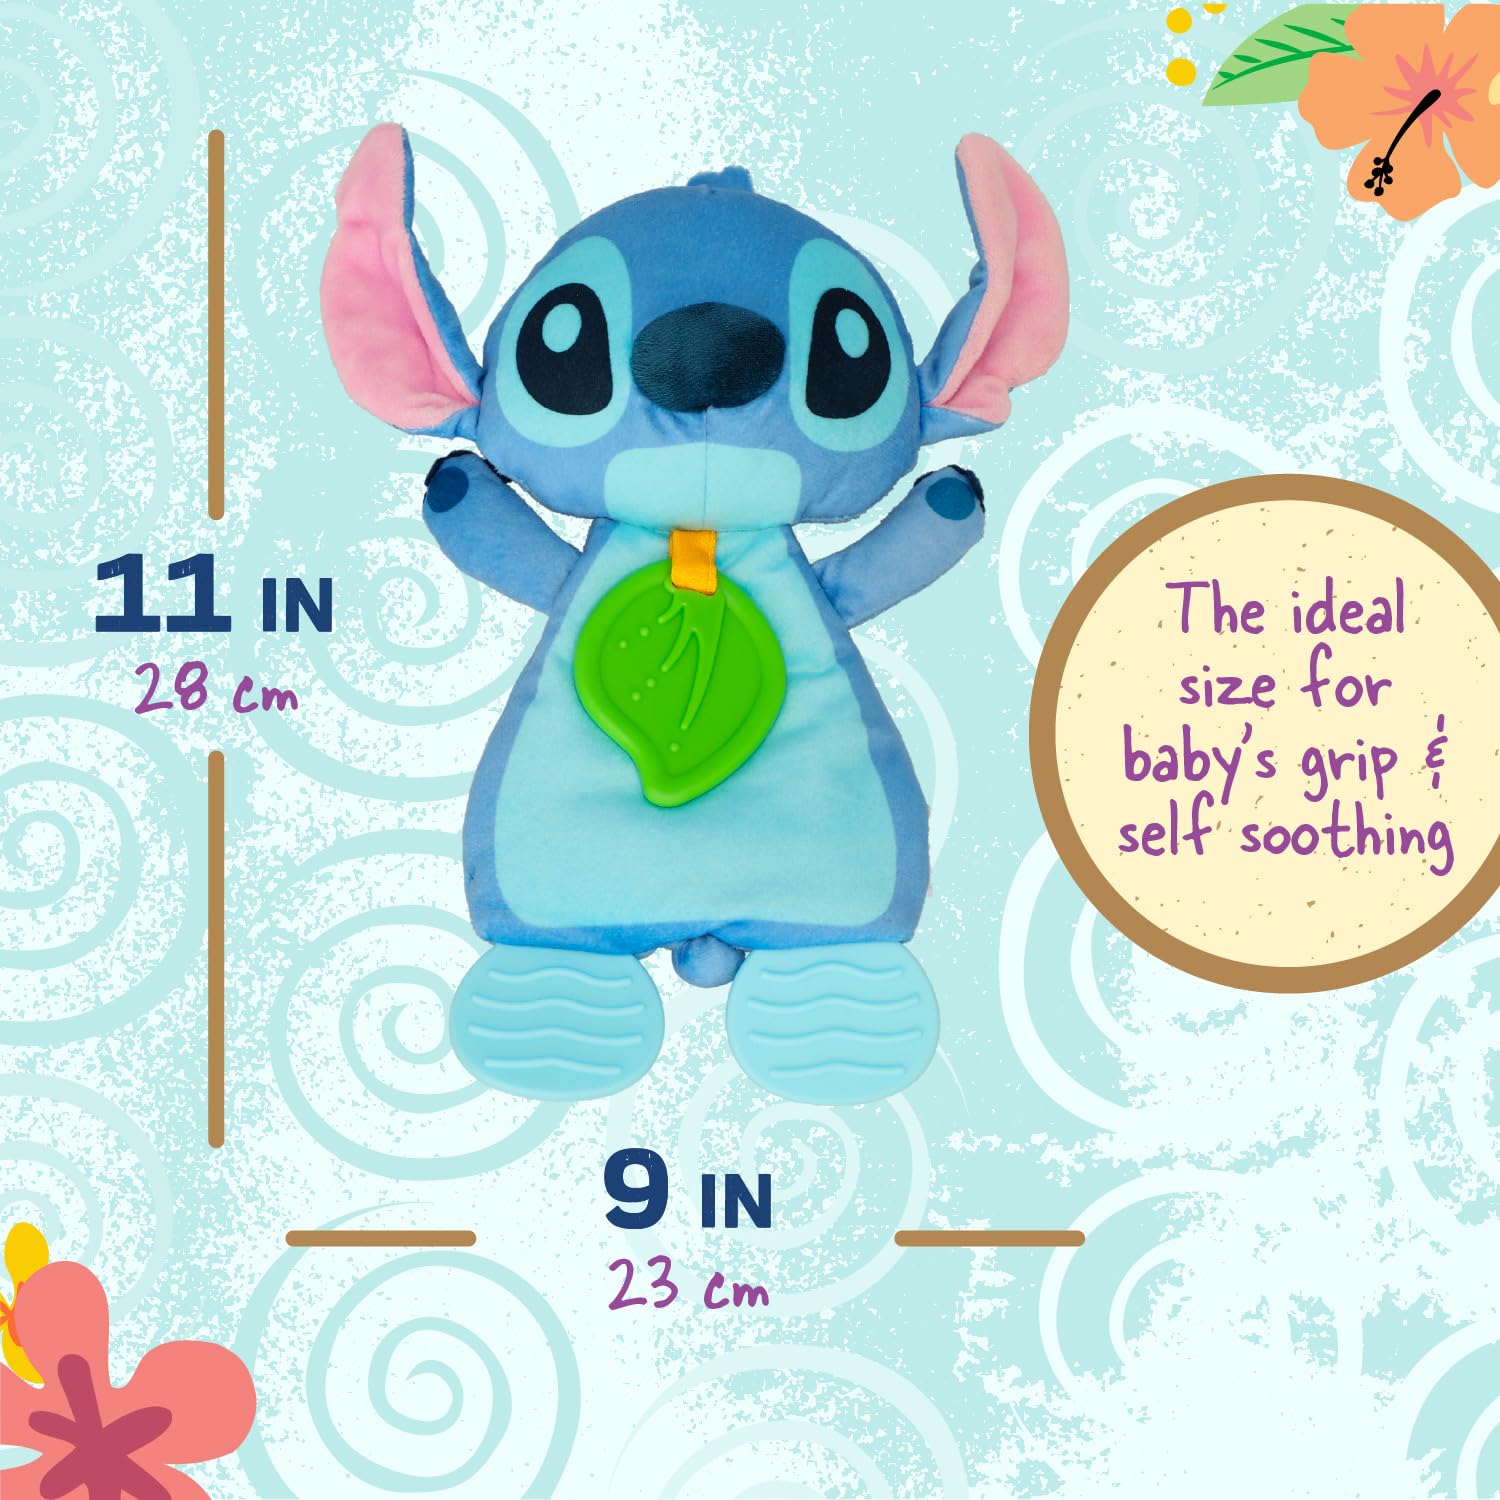 Kids Preferred Disney Baby's Lilo and Stitch - Stitch Plush and Sensory Crinkle Teether Toys for Newborn Baby Boys and Girls 10 inches